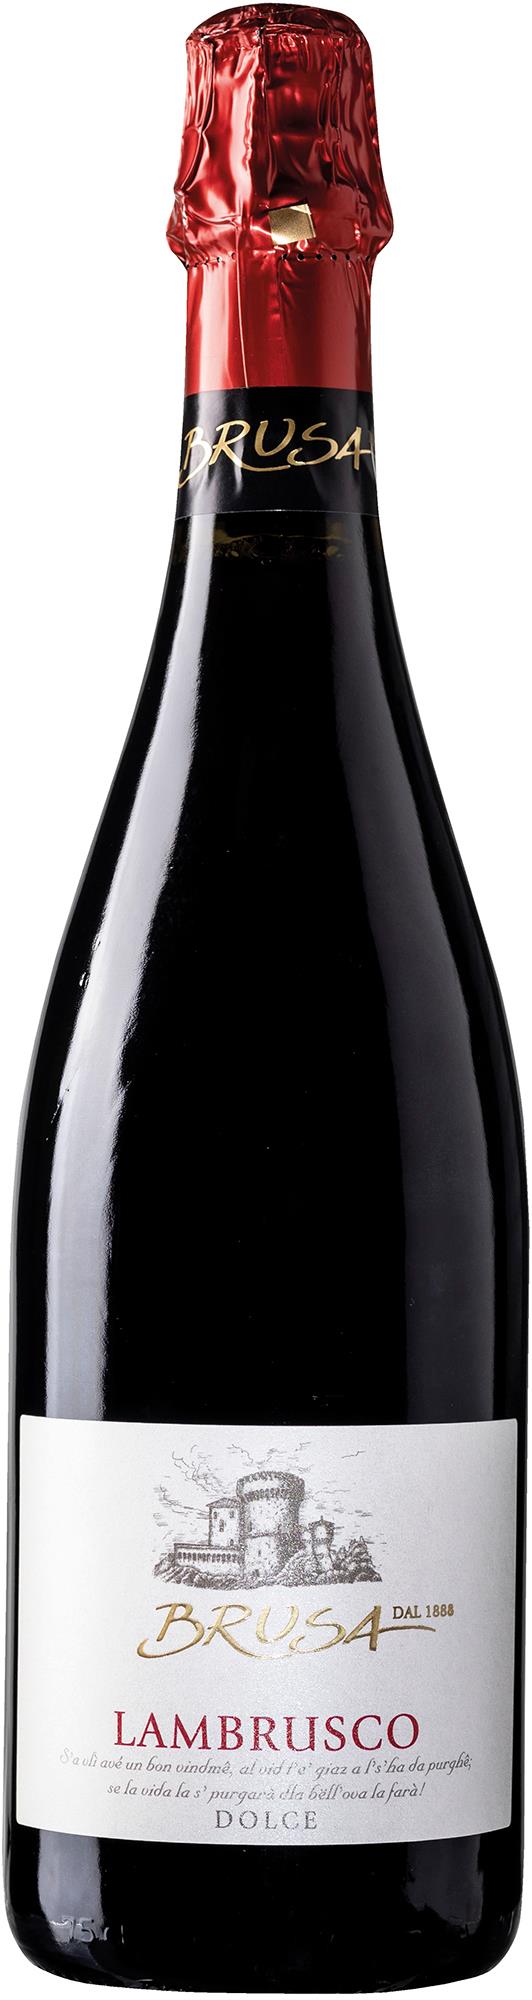 BRUSA, LAMBRUSCO ROSSO DOLCE 75 cl 7,5%